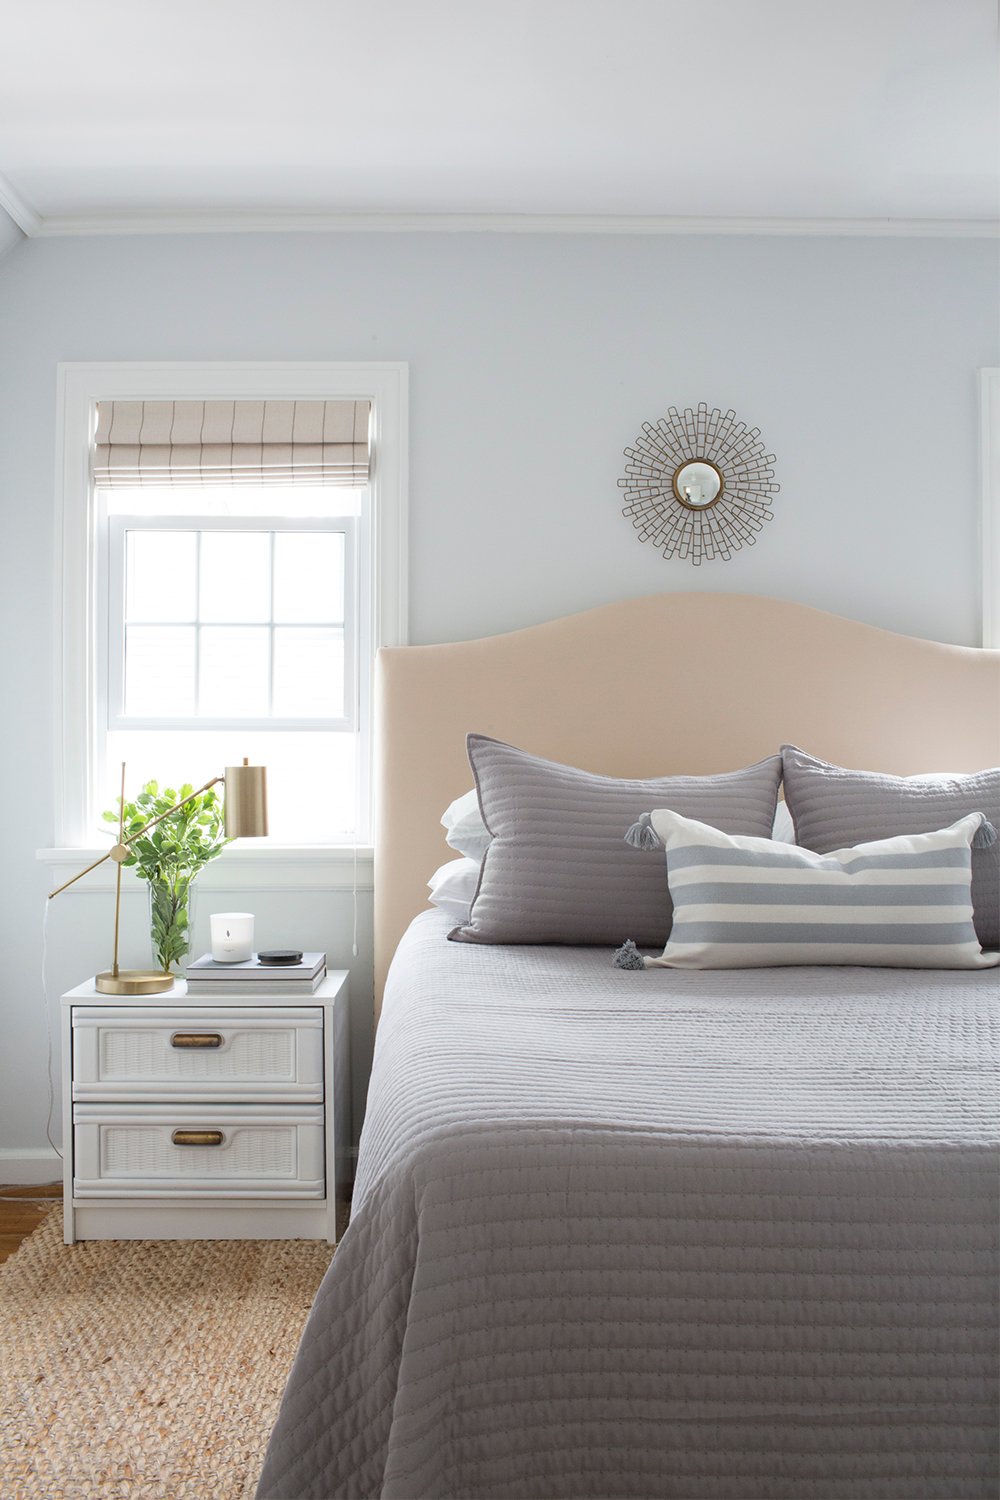 How to Give Your Bedroom a Refresh Using Textiles - roomfortuesday.com